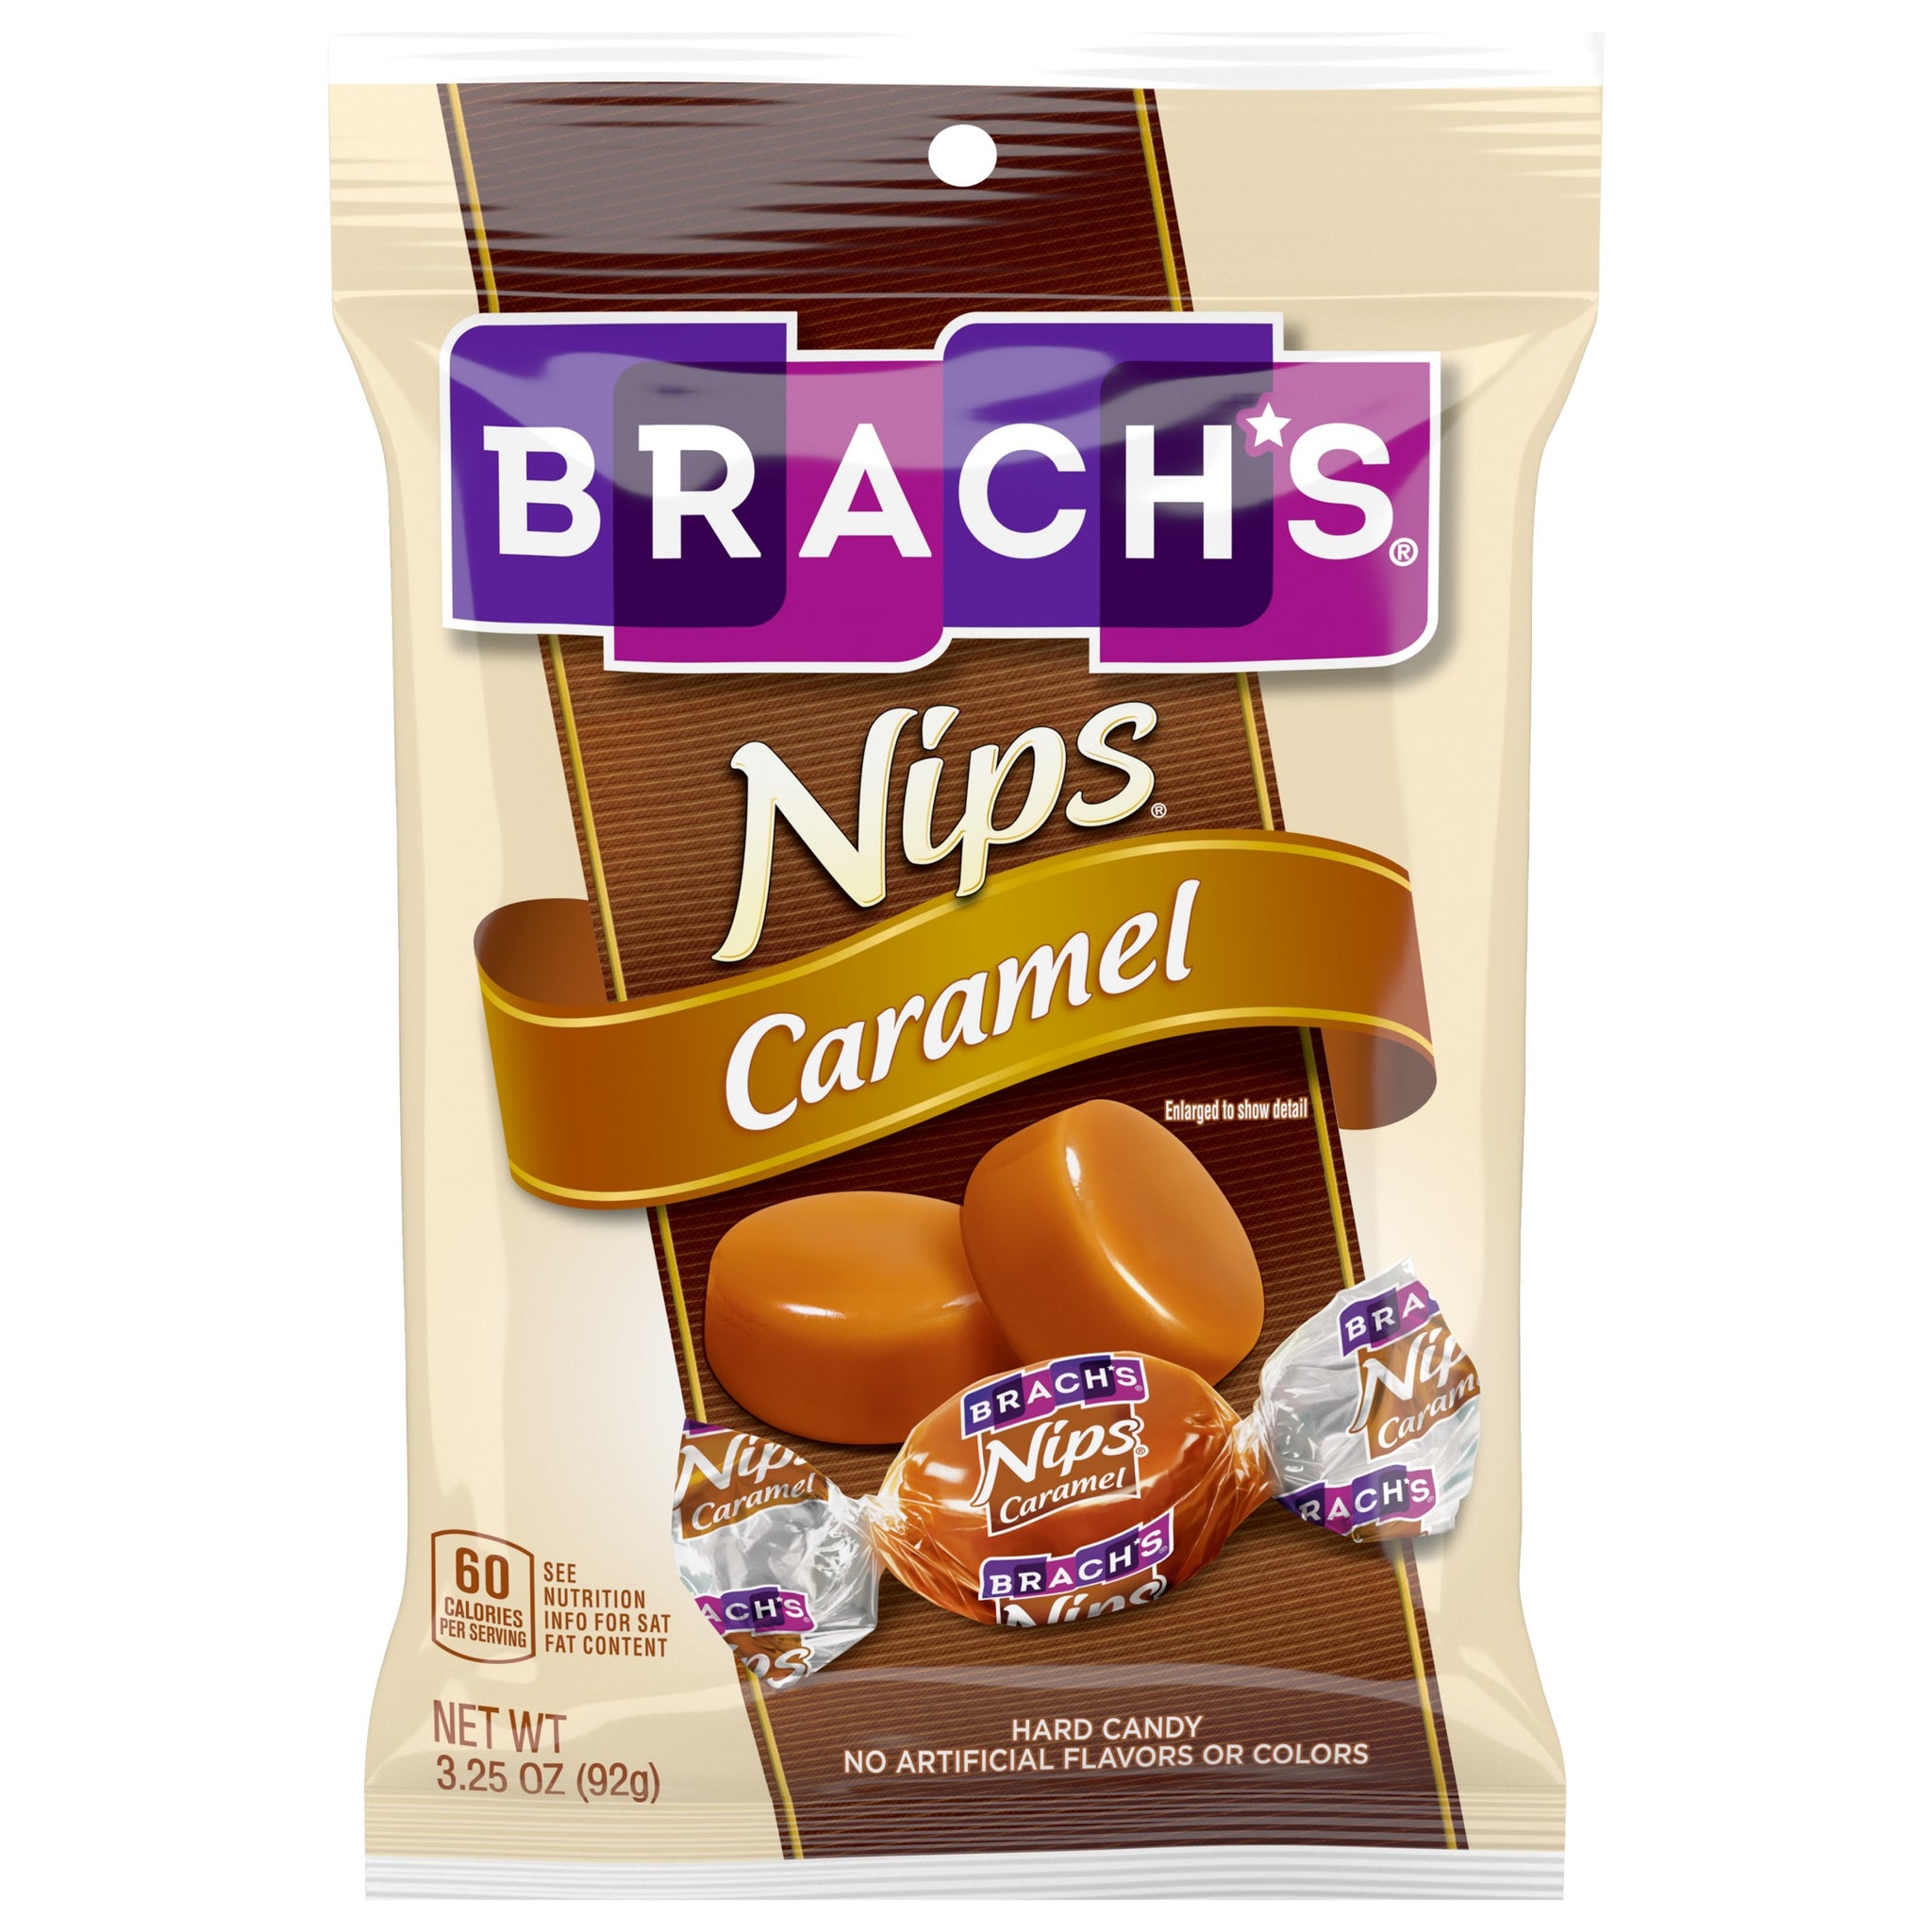  Brach's Fall Festival, Kettle Corn, Caramel Apple, and Cotton  Candy Flavored Halloween Candy Corn, 8 oz Bag : Grocery & Gourmet Food